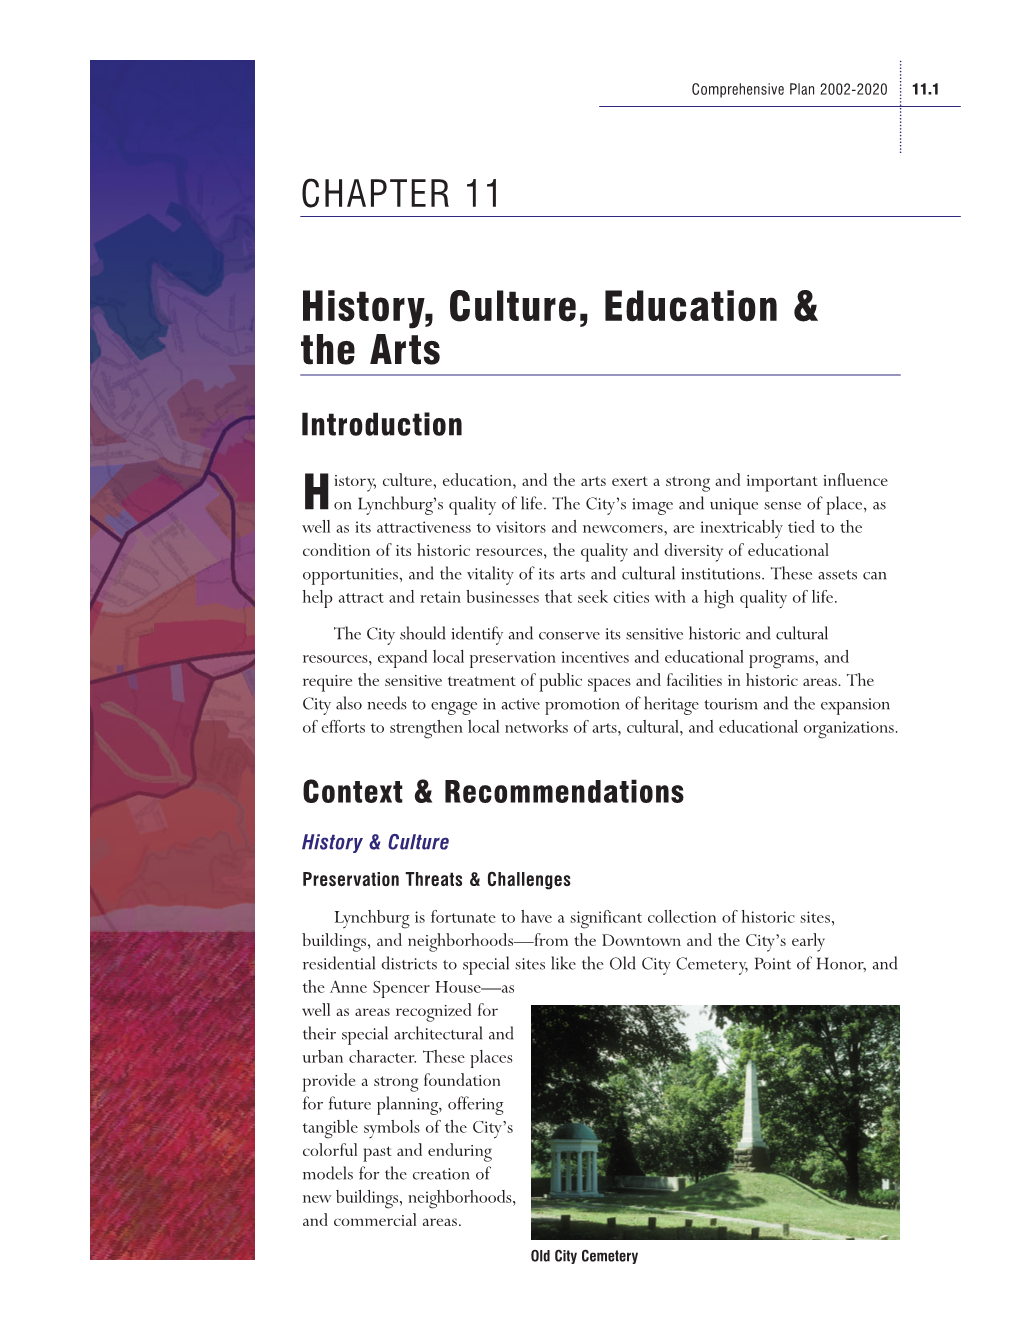 History, Culture, Education & the Arts